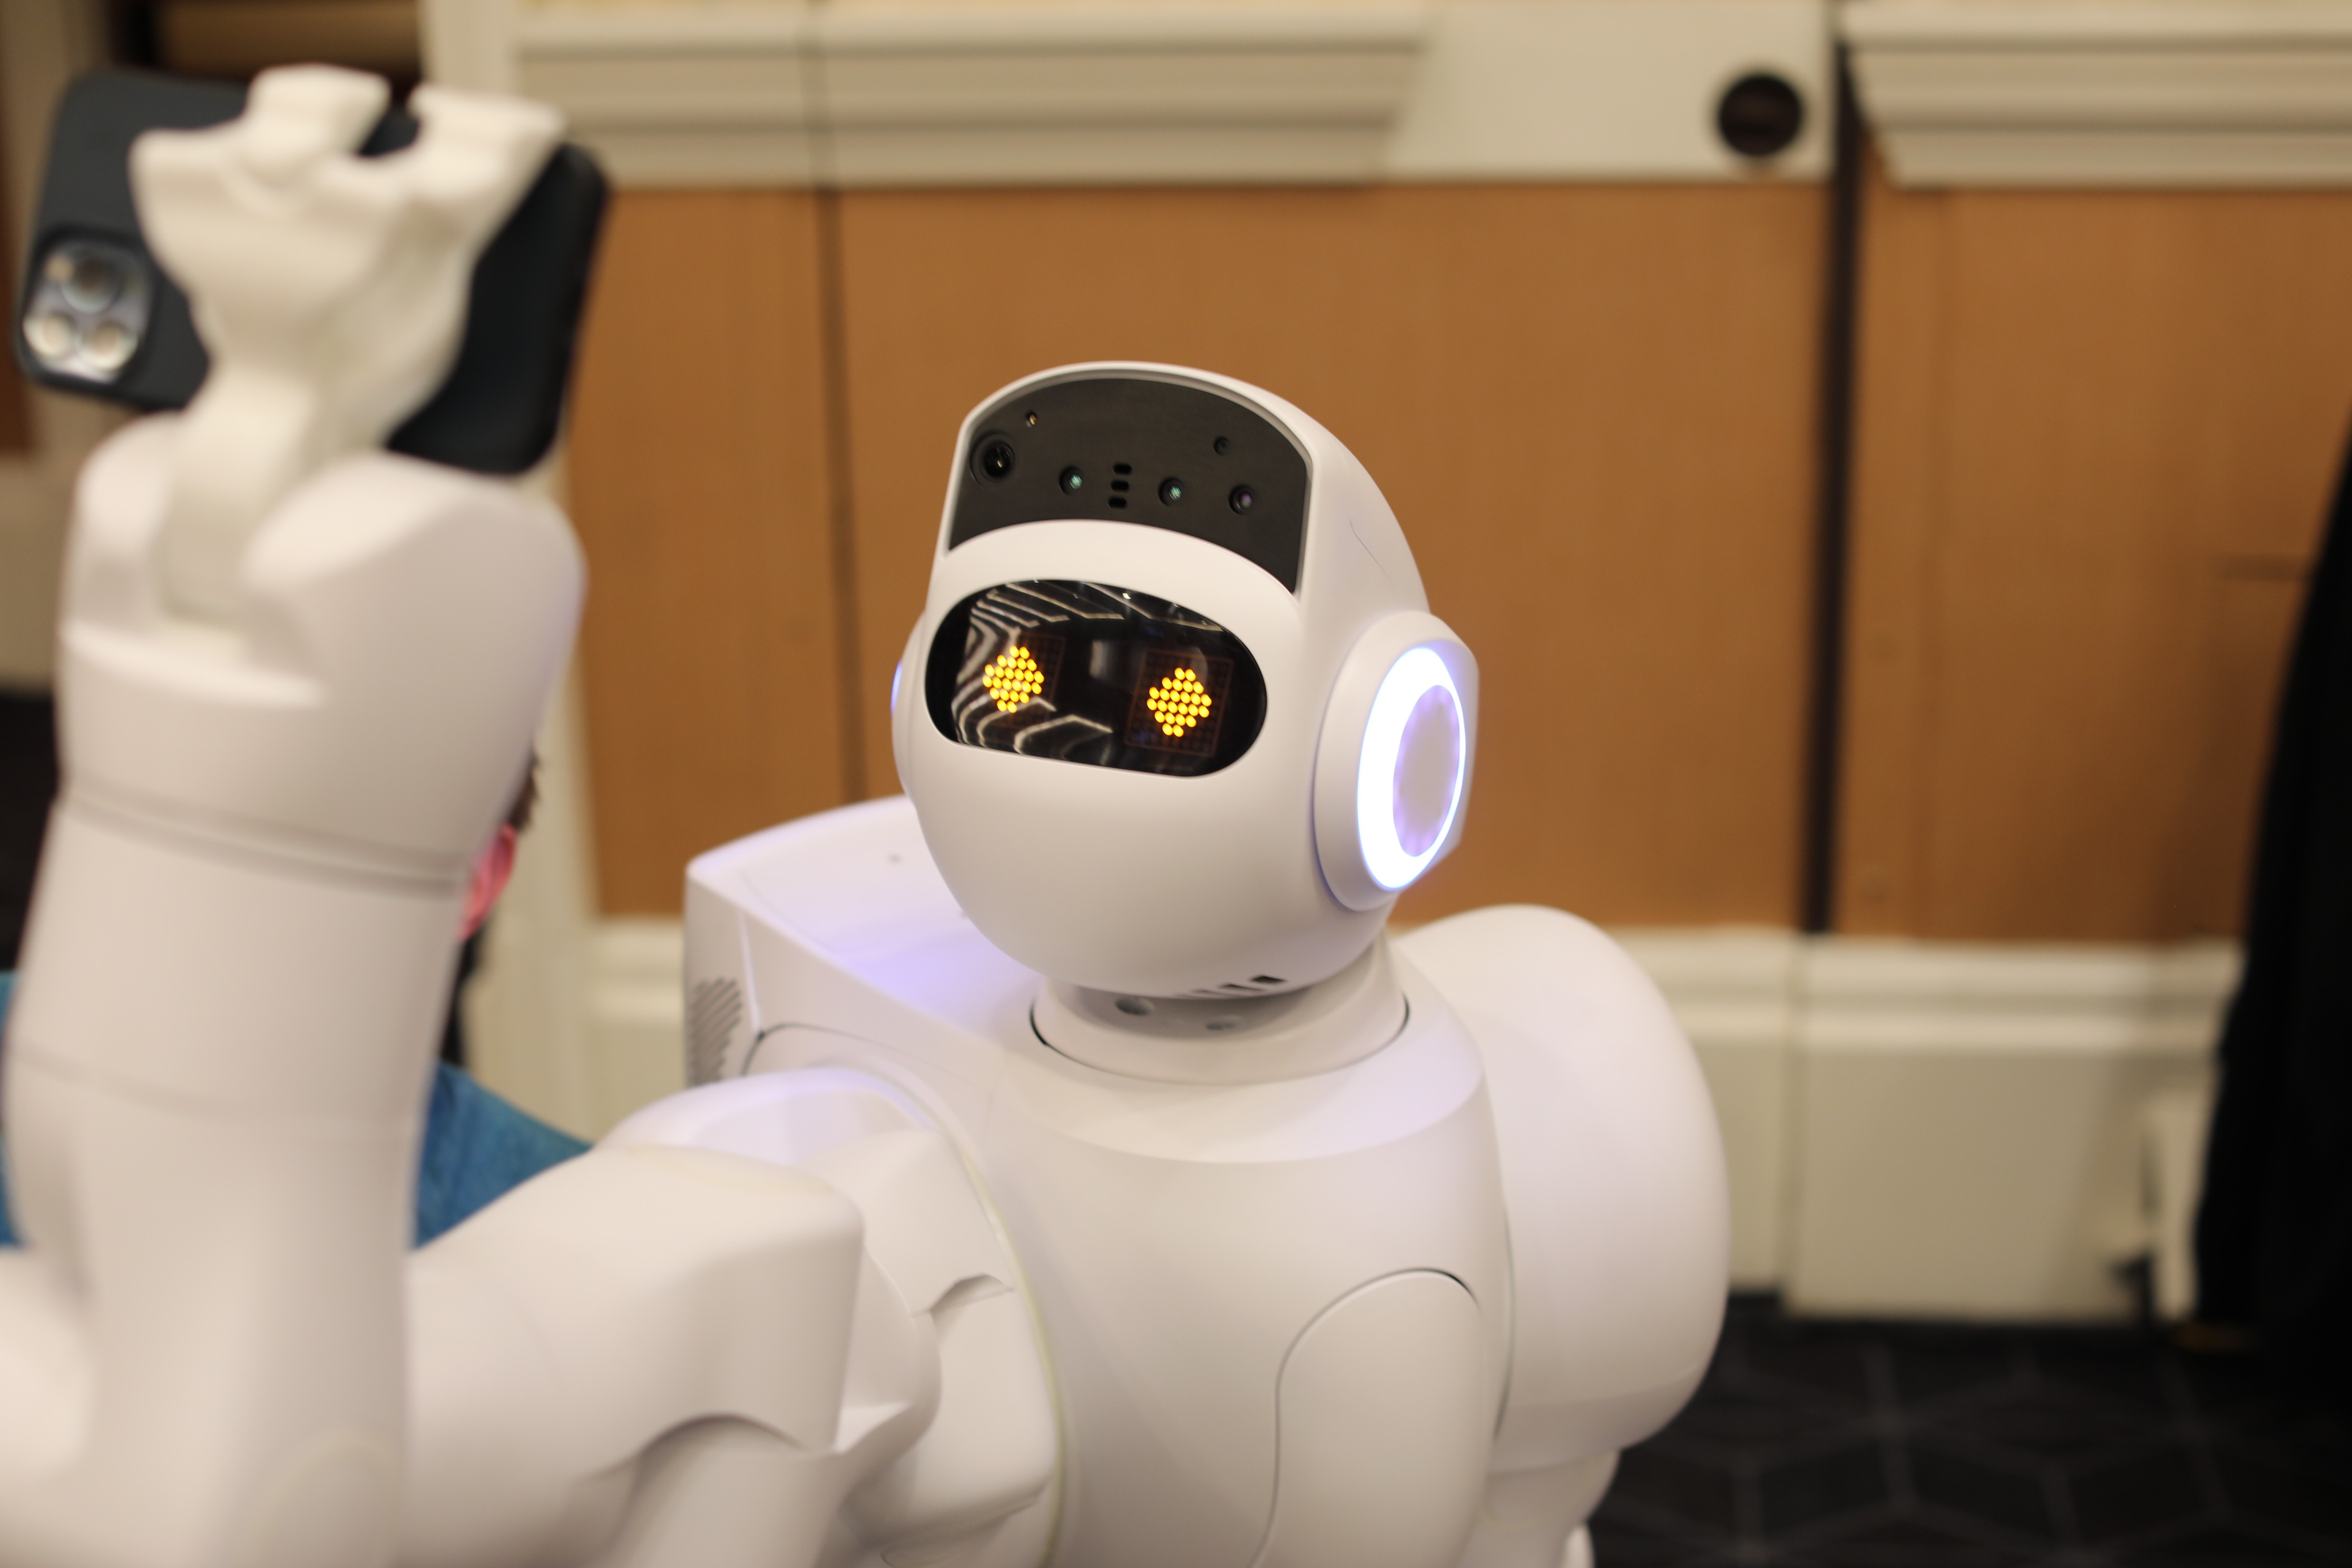 The Aeo robot is designed to patrol and disinfect hospitals | TechCrunch